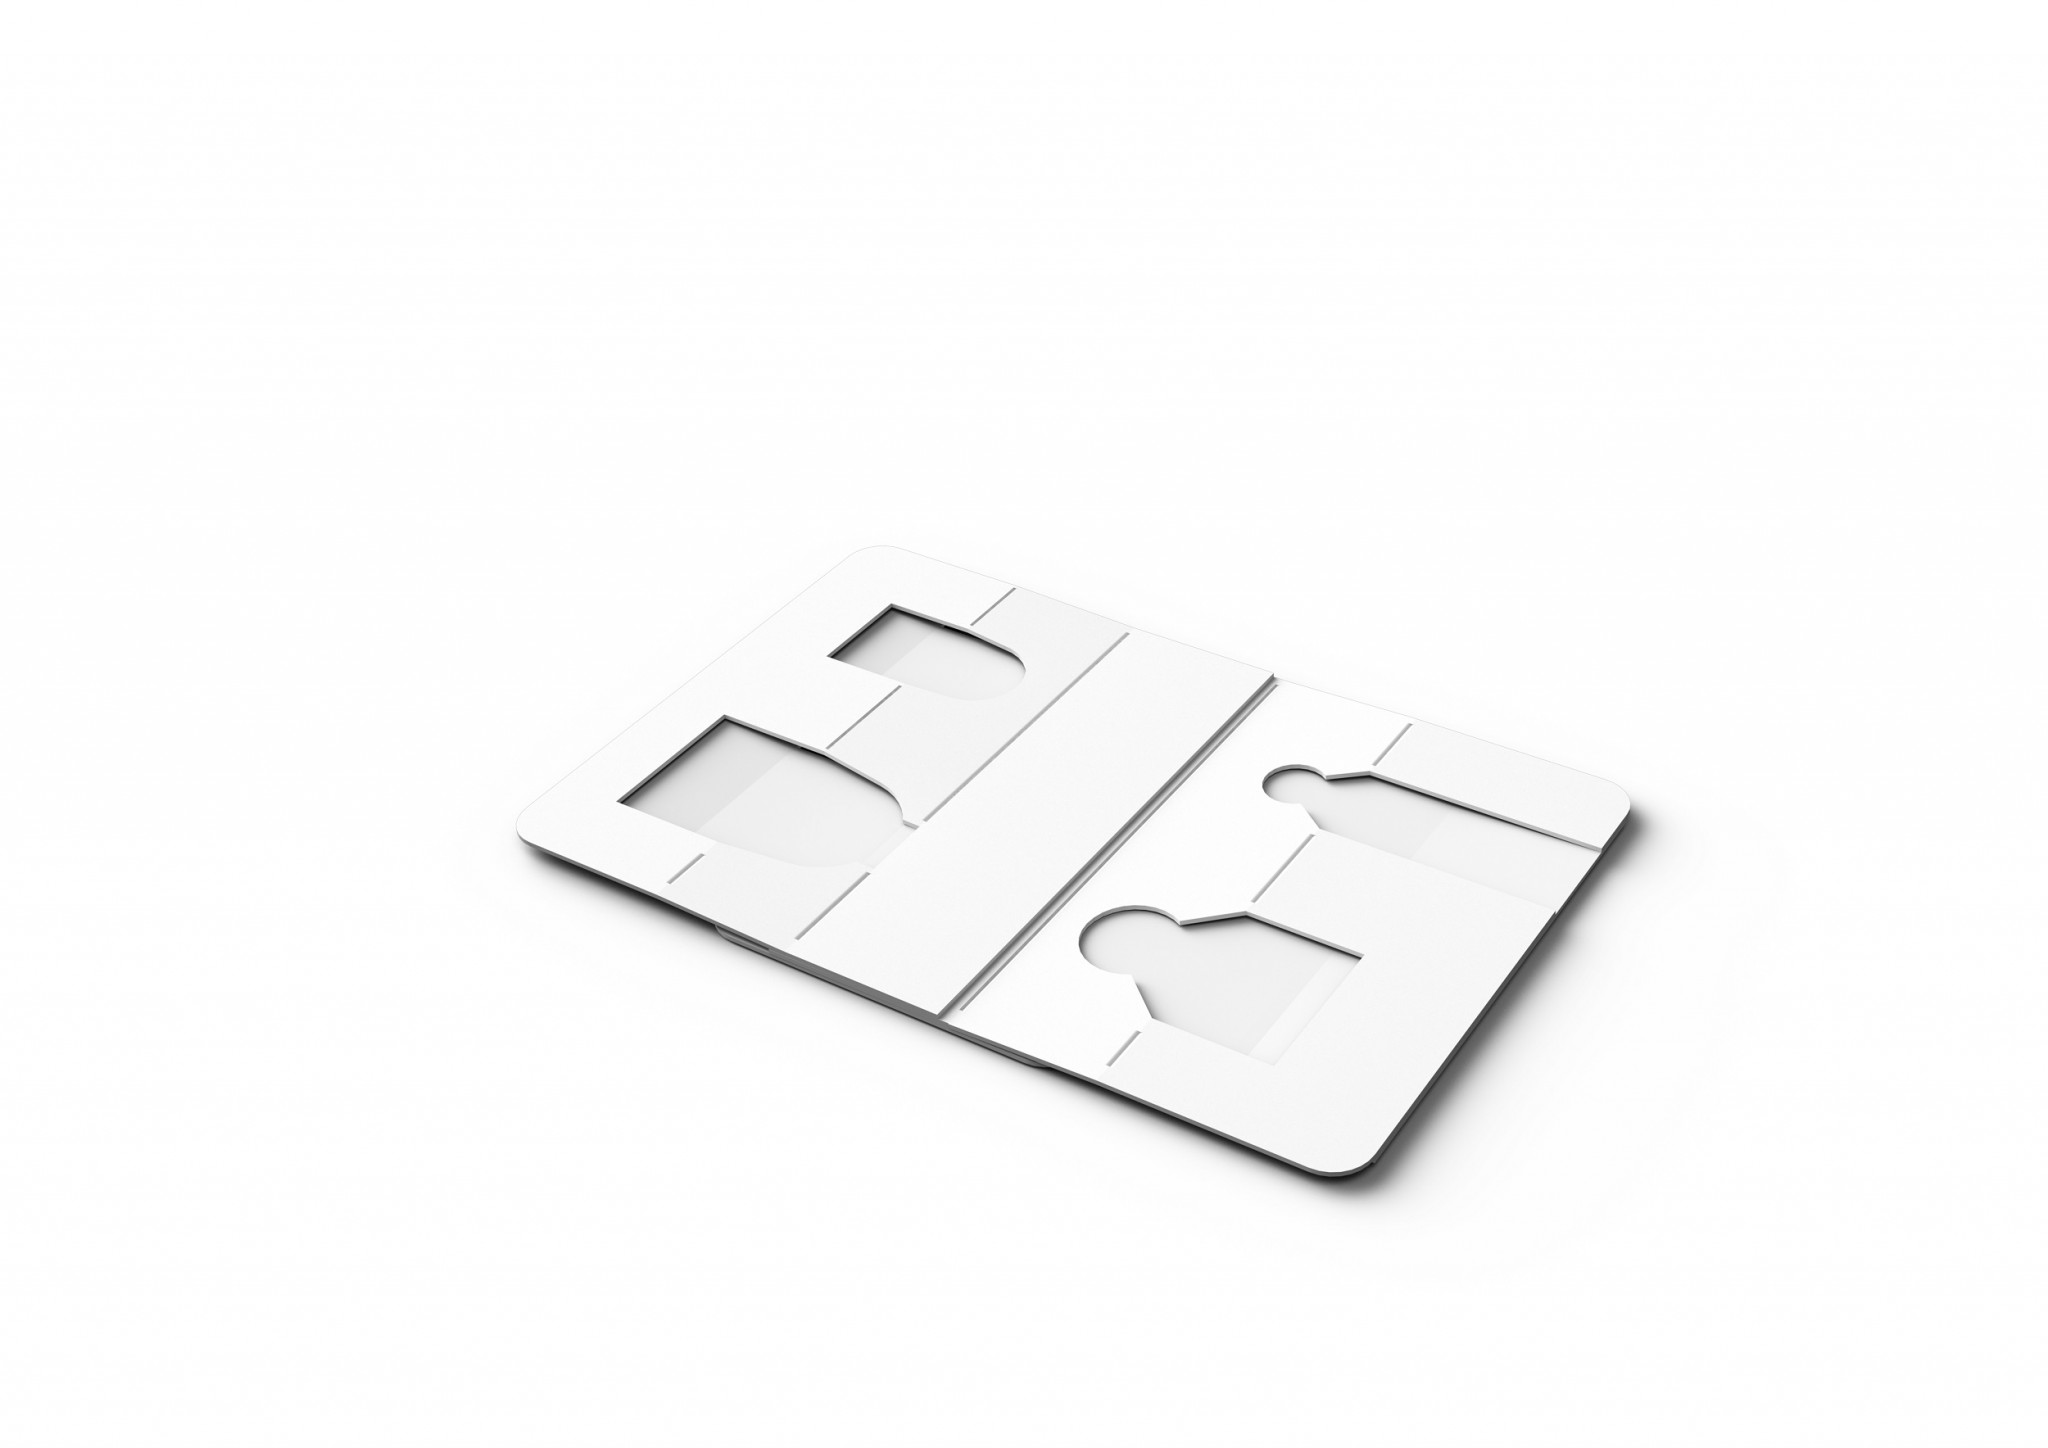 We designed a tray and a carton tailored for this specific customer, both made of card